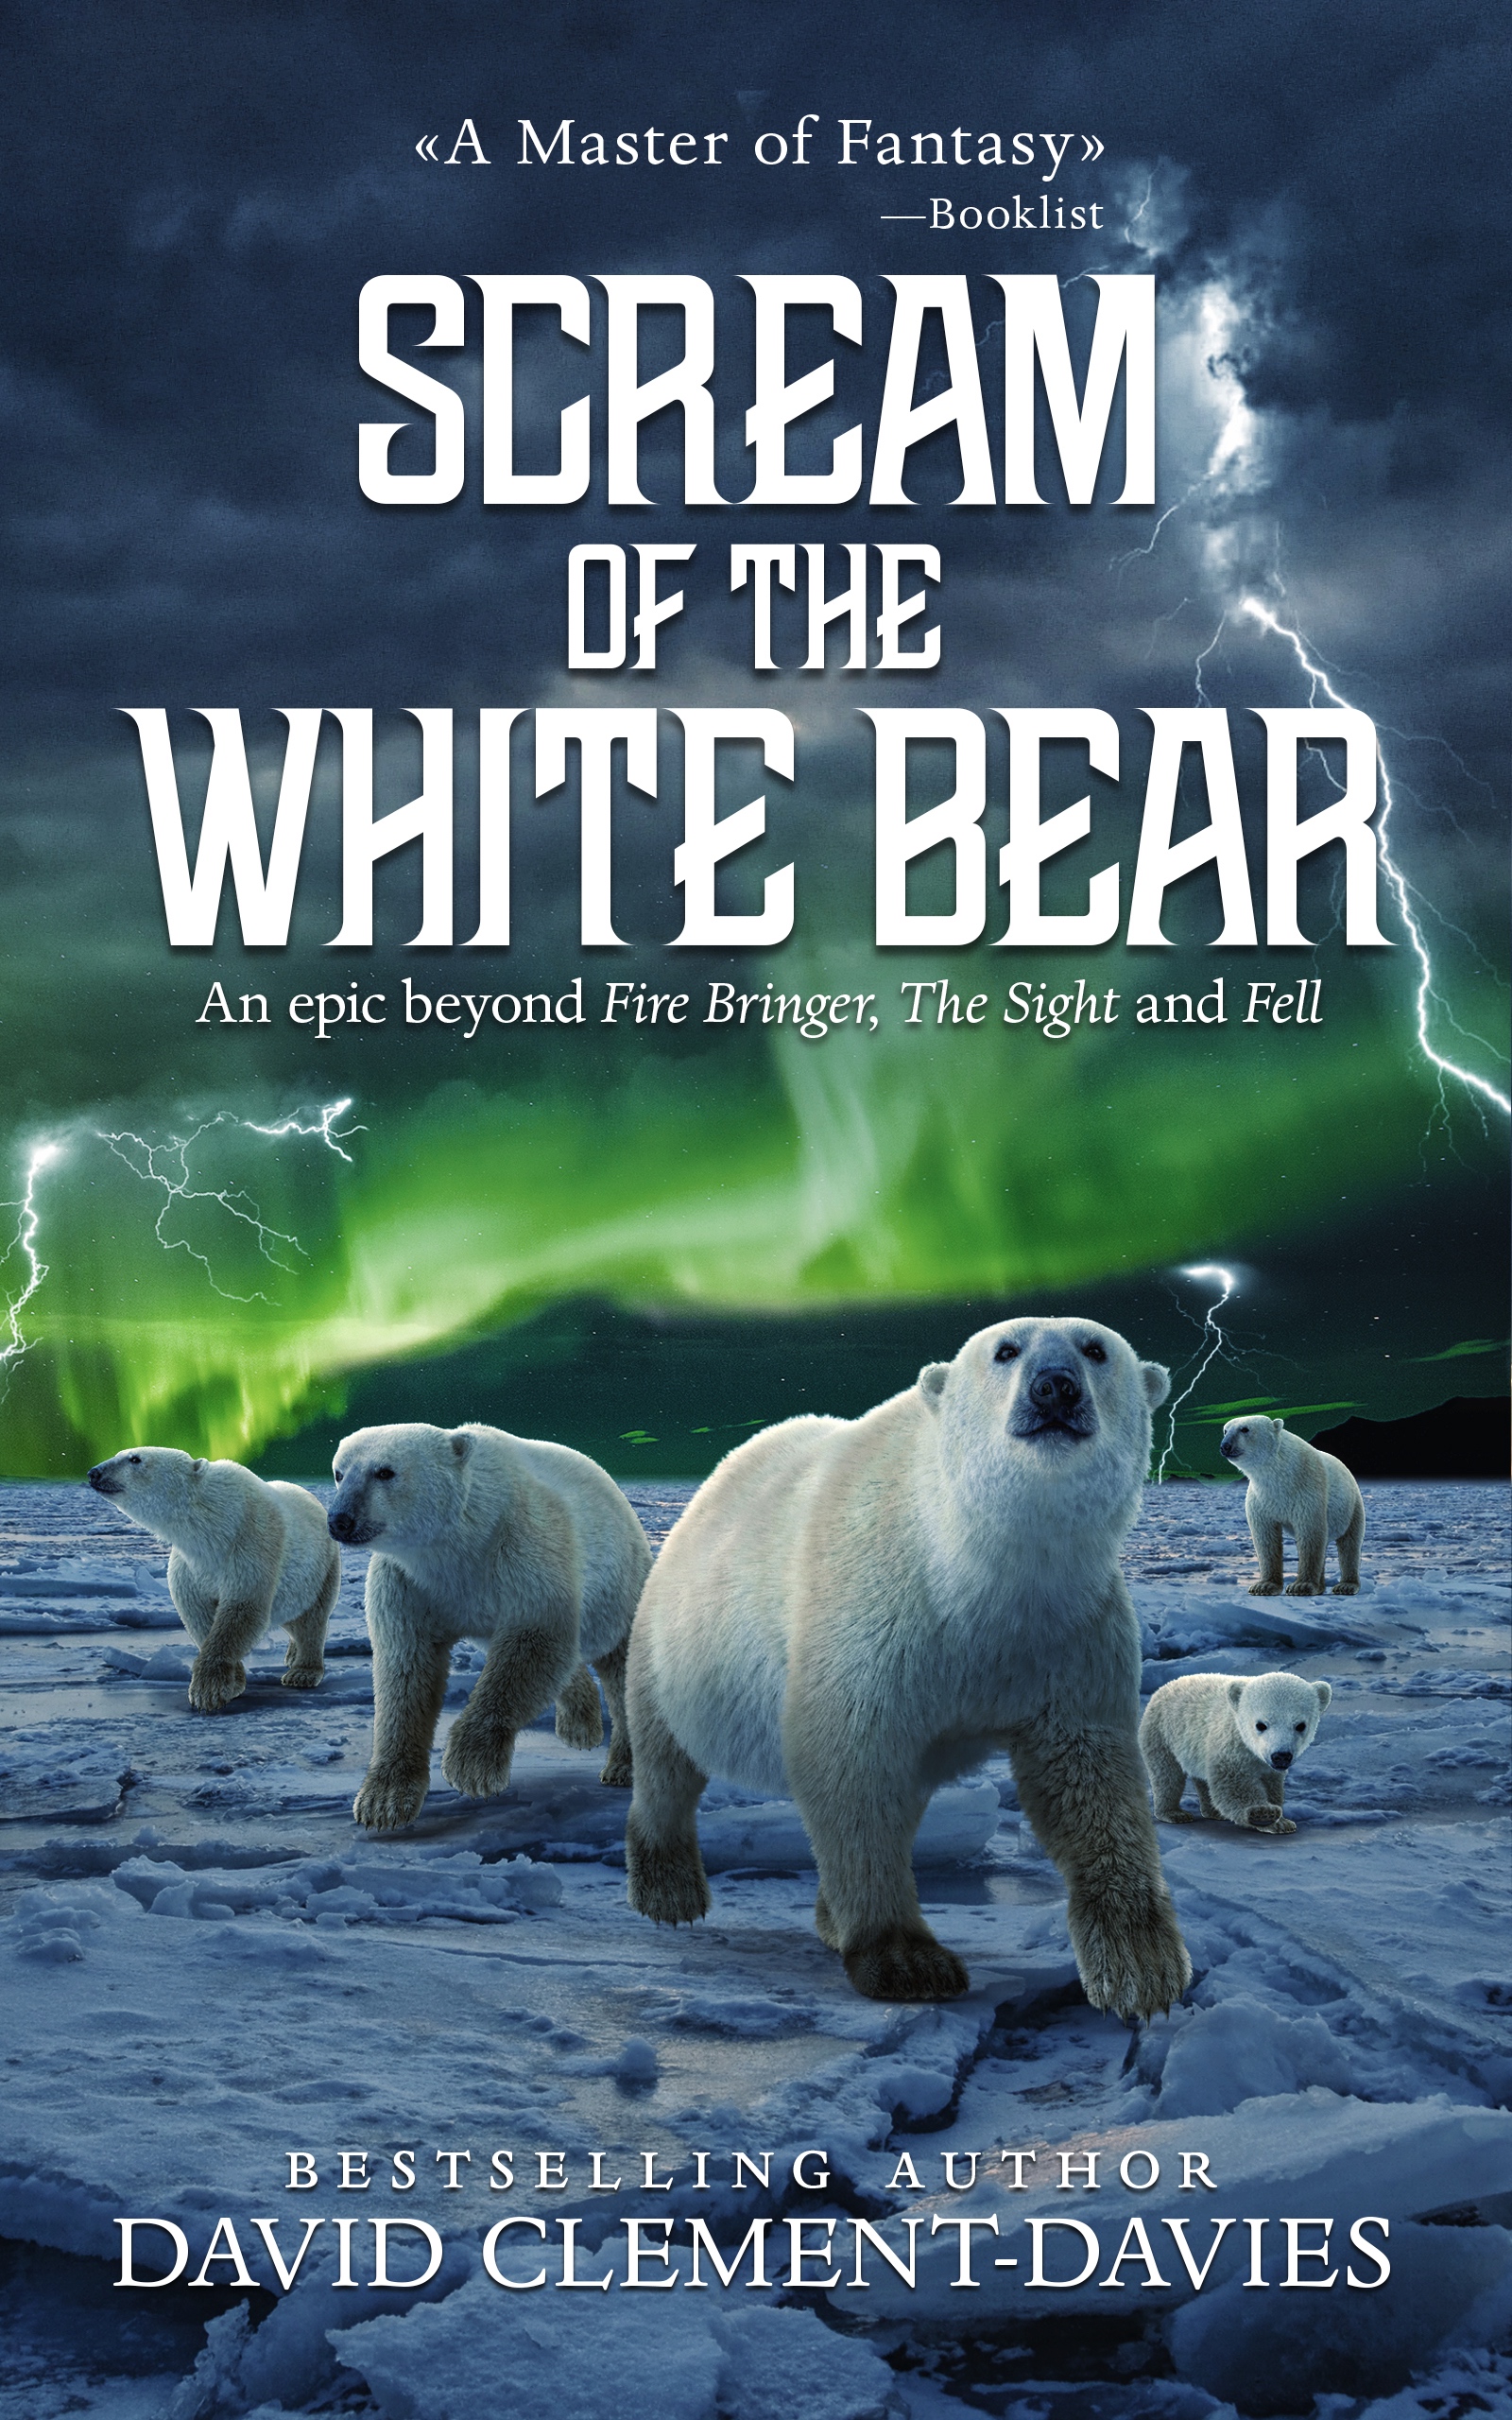 FREE: Scream of the White Bear by David Clement-Davies